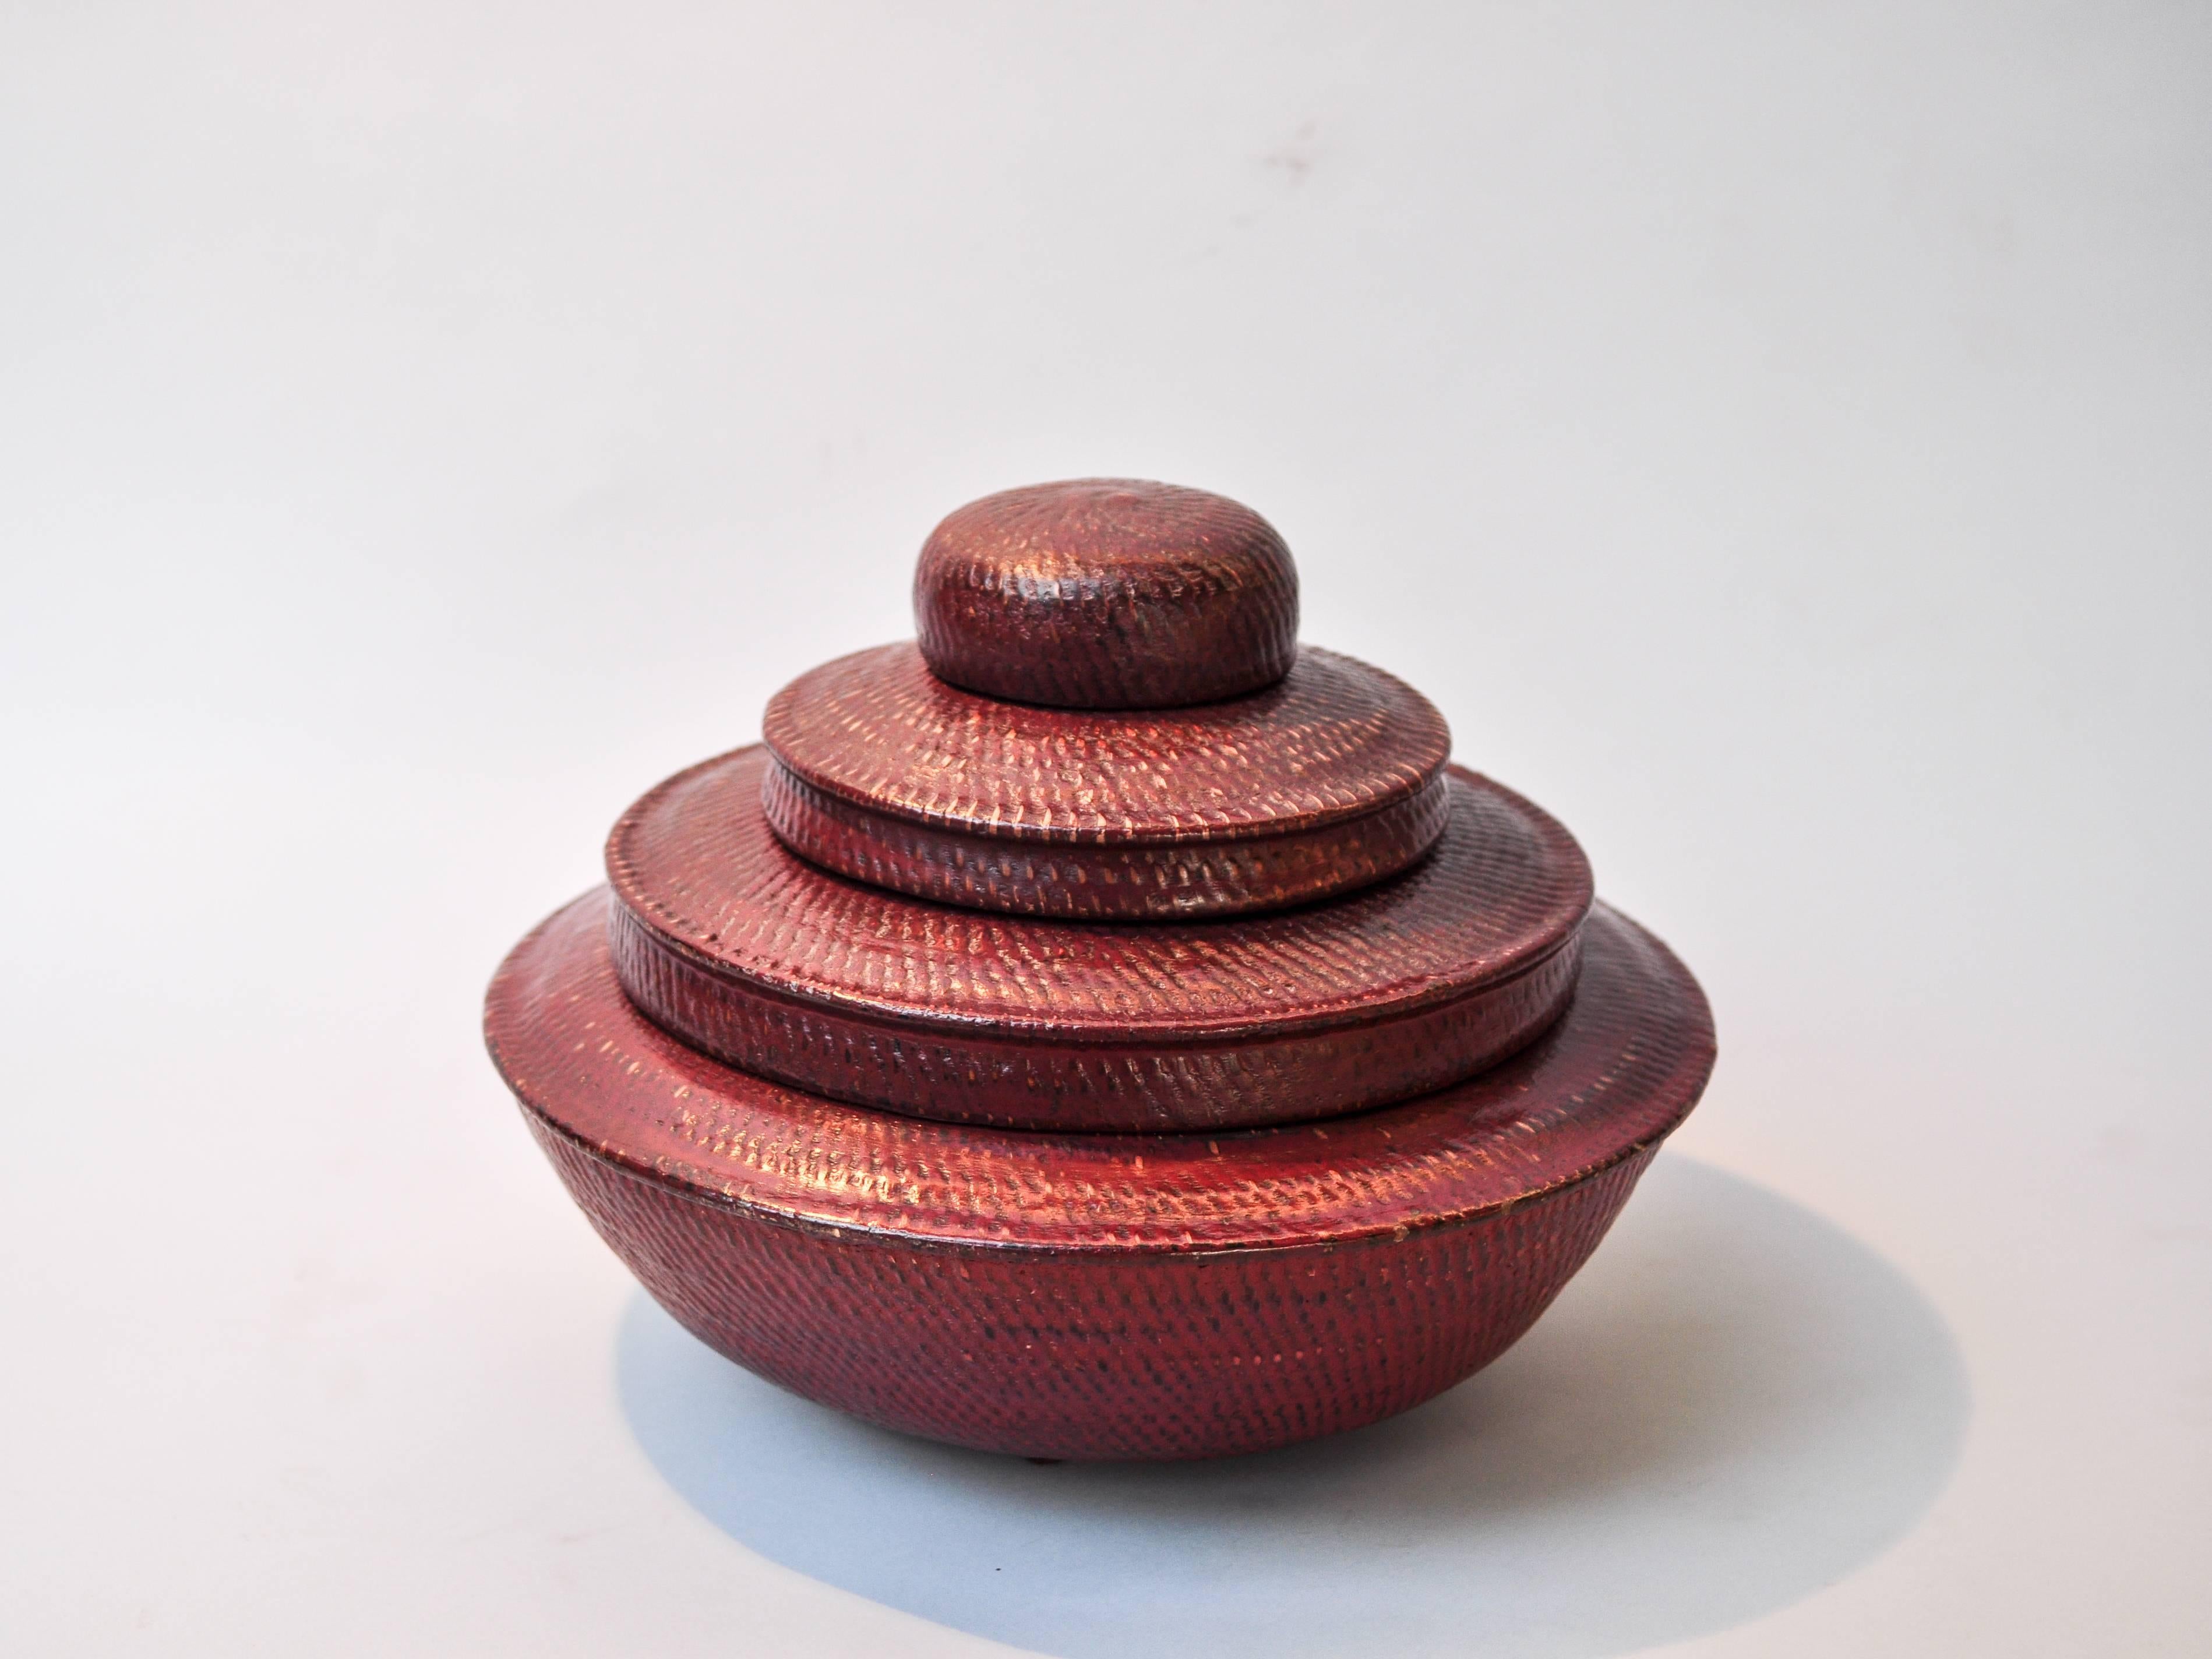 Folk Art Tiered Red Lacquer Offering Vessel, Hsun Gwet, Burma, Mid-20th Century, Rattan